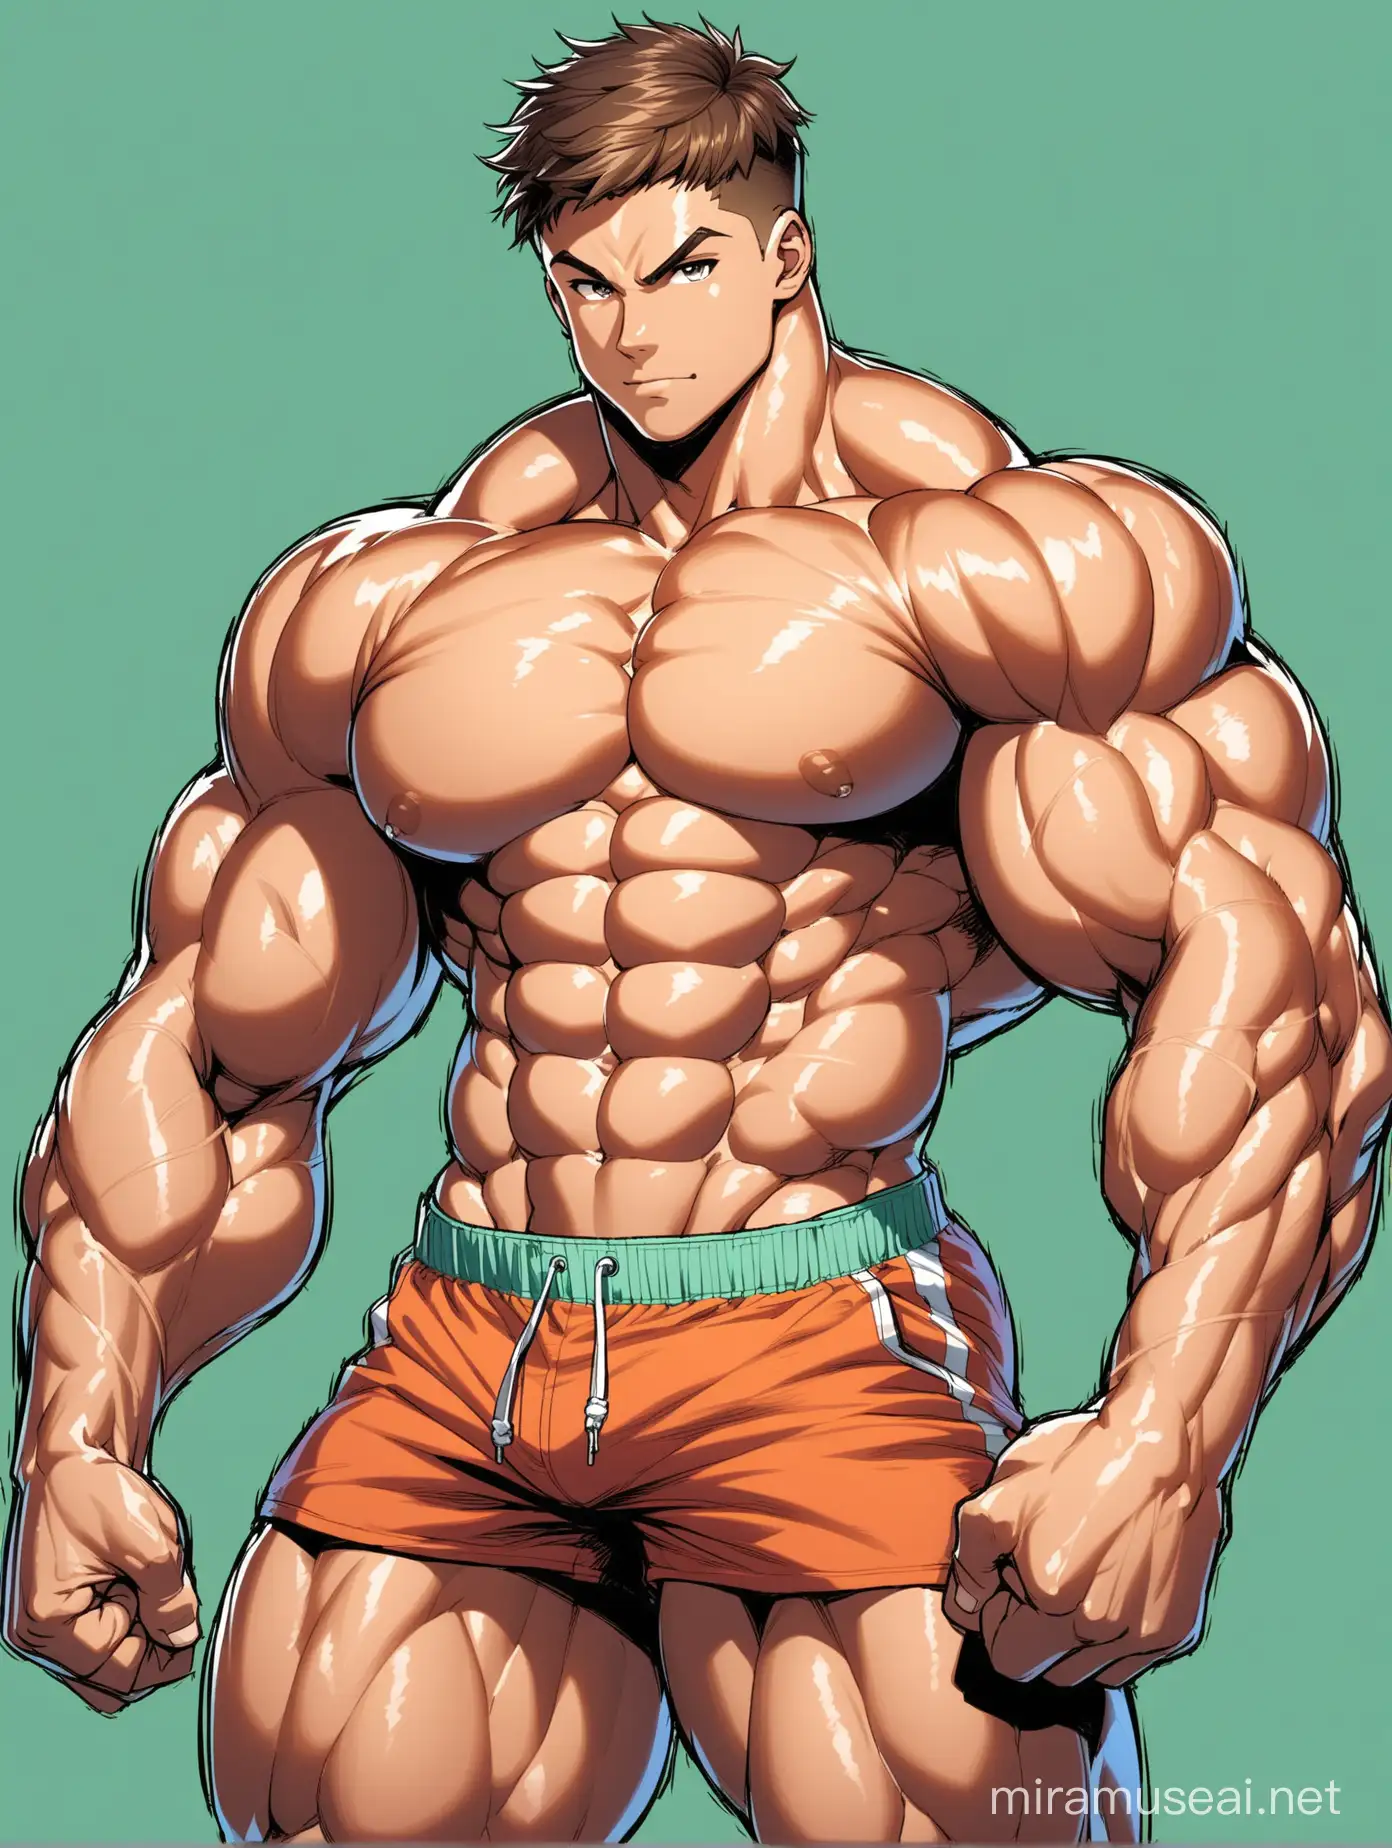 Full color drawing of an extremely muscular teenage male flexing his muscles, showing off his huge muscles, with very a beautiful, delicate face, wide shoulders, huge biceps, hard six-pack abs, and very strong and powerful legs, wearing shorts or trunks